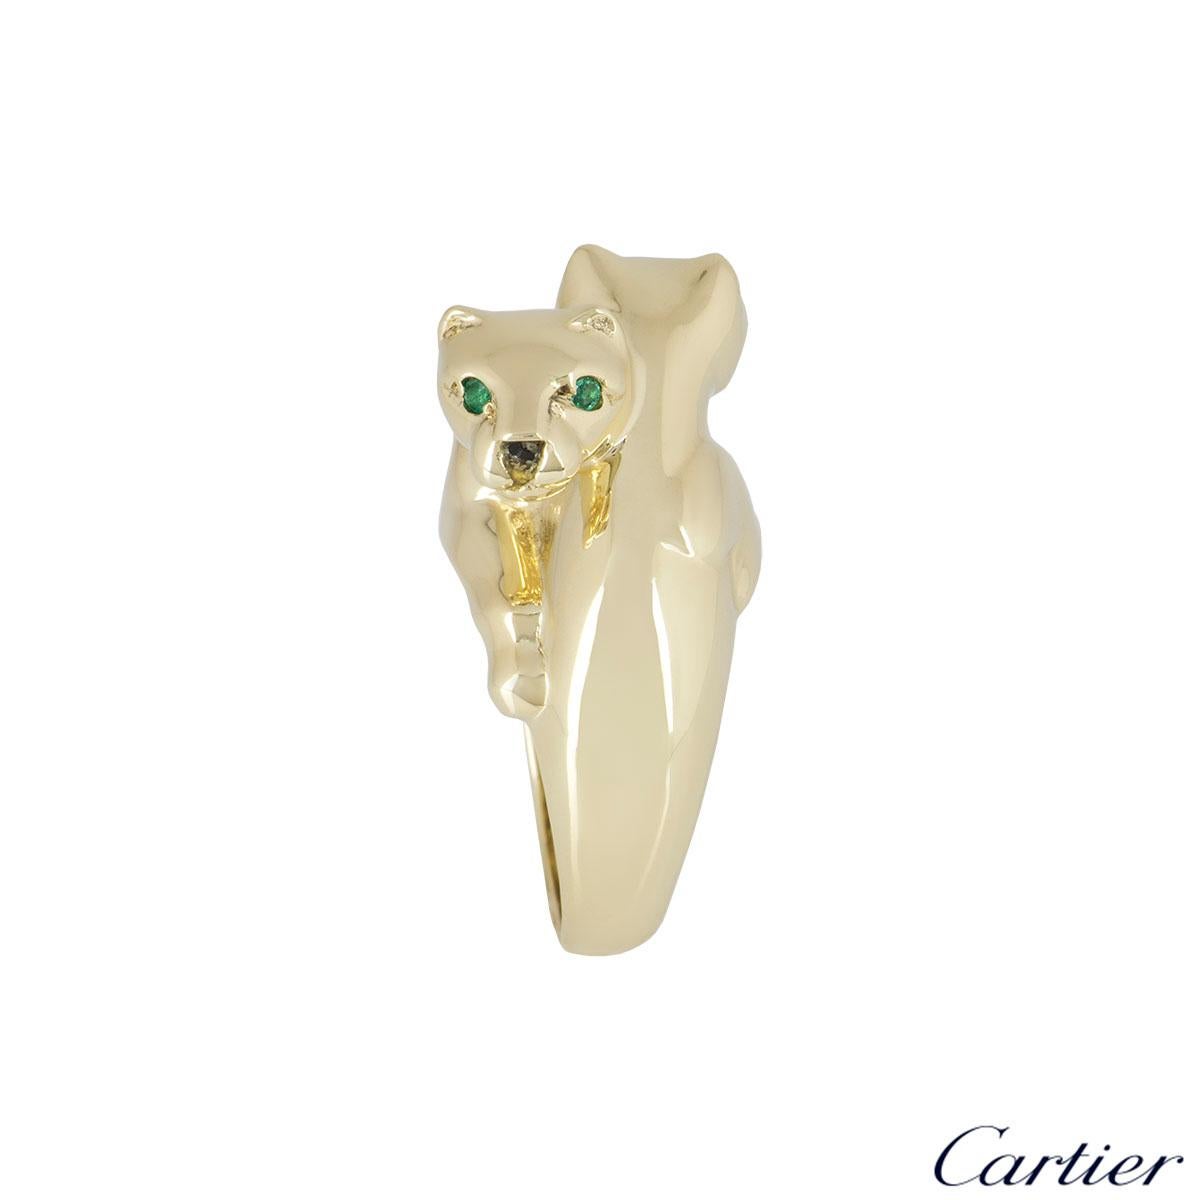 A beautiful 18k yellow gold ring by Cartier from the Panthere De Cartier collection. The ring is composed of two panthere head motifs beside each other and are complemented with two round emeralds set as the eyes and onyx for the nose with the body